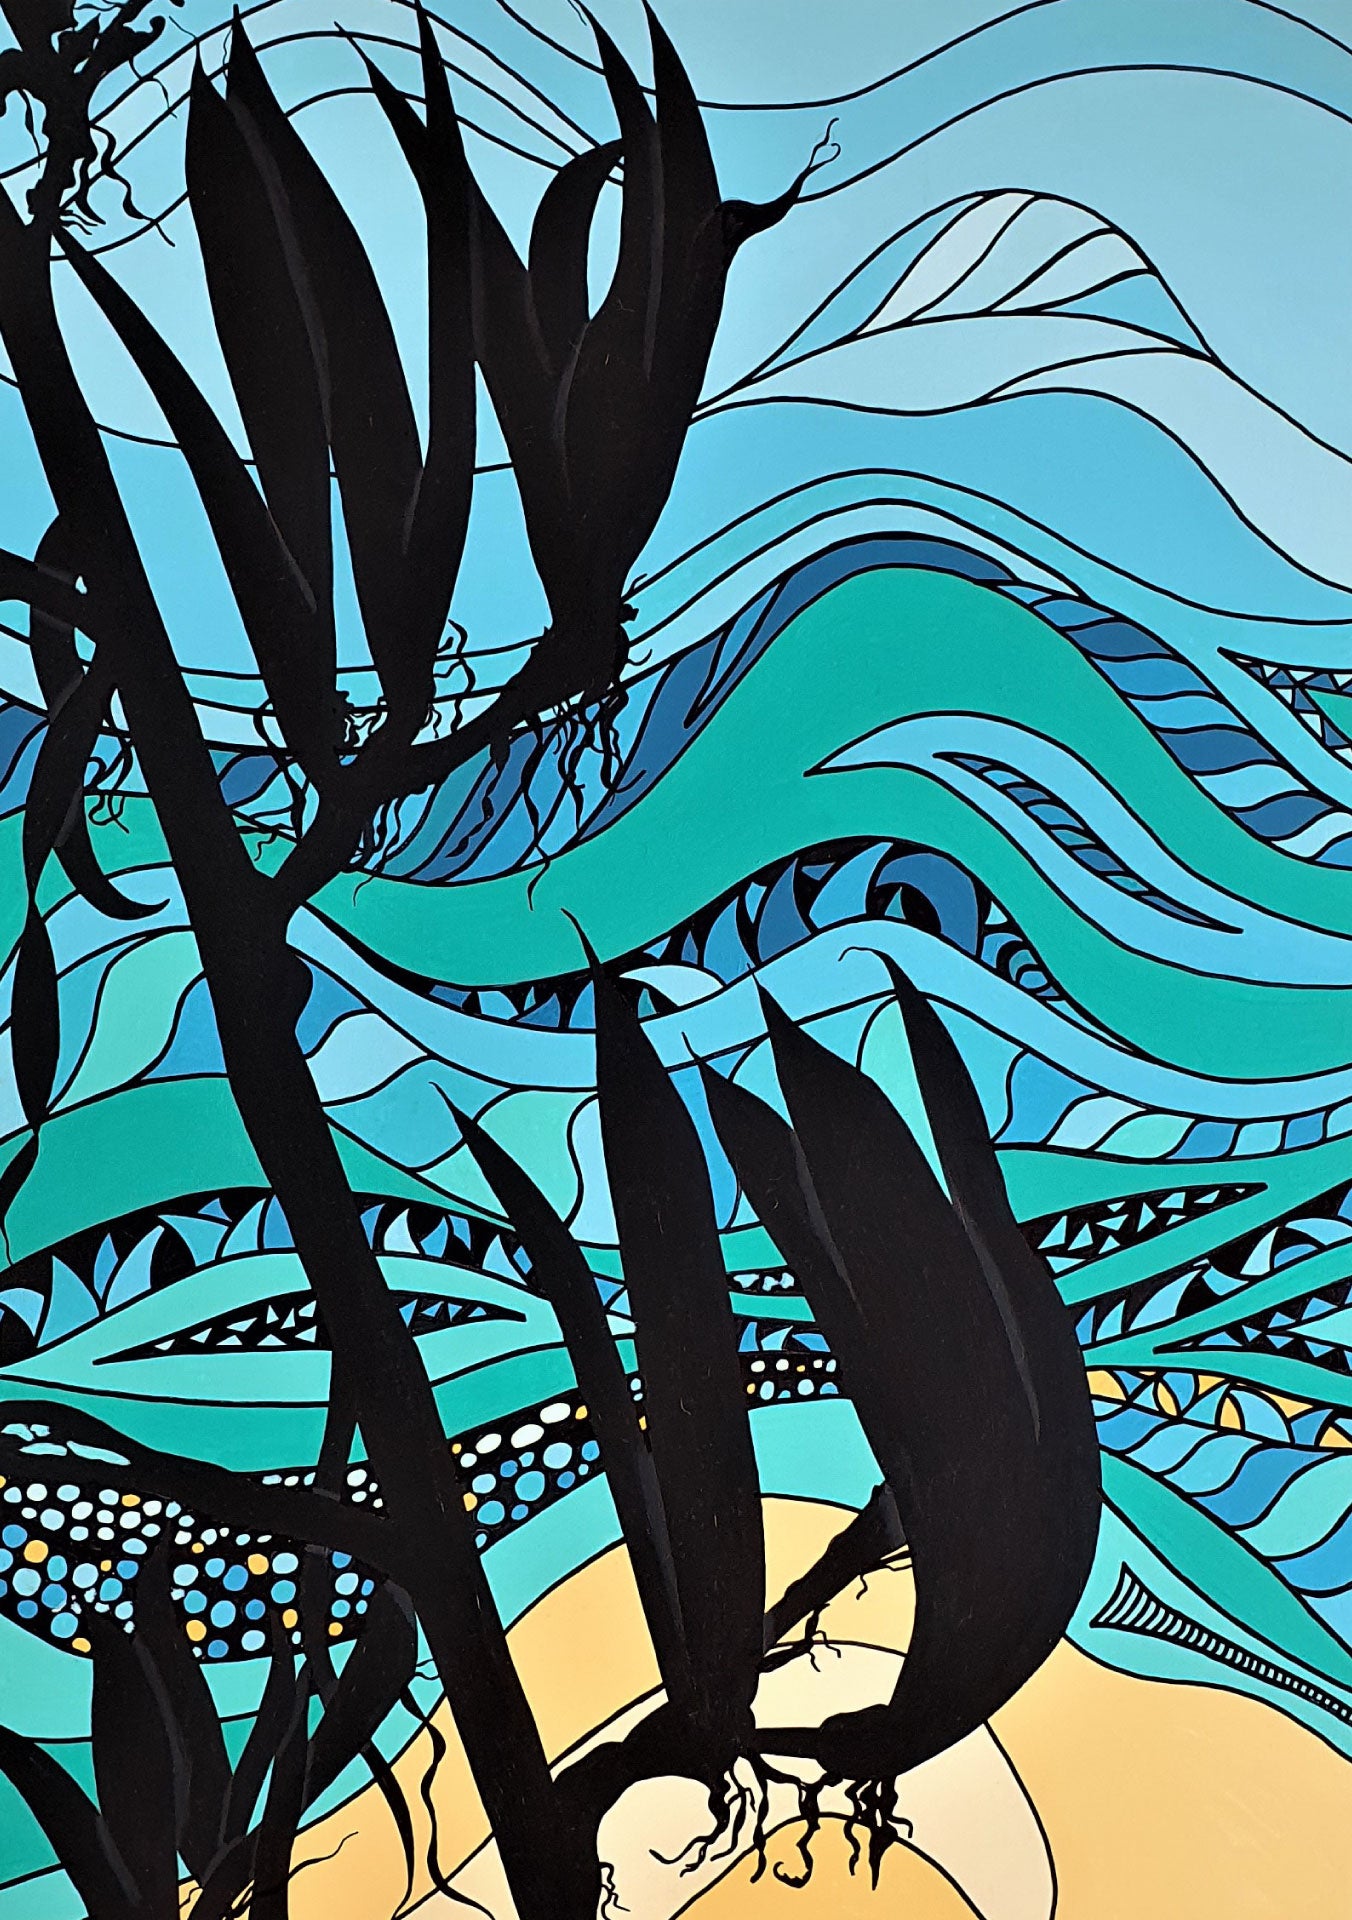 New Zealand coast and beaches inspired abstract artwork by Nicky Lowe